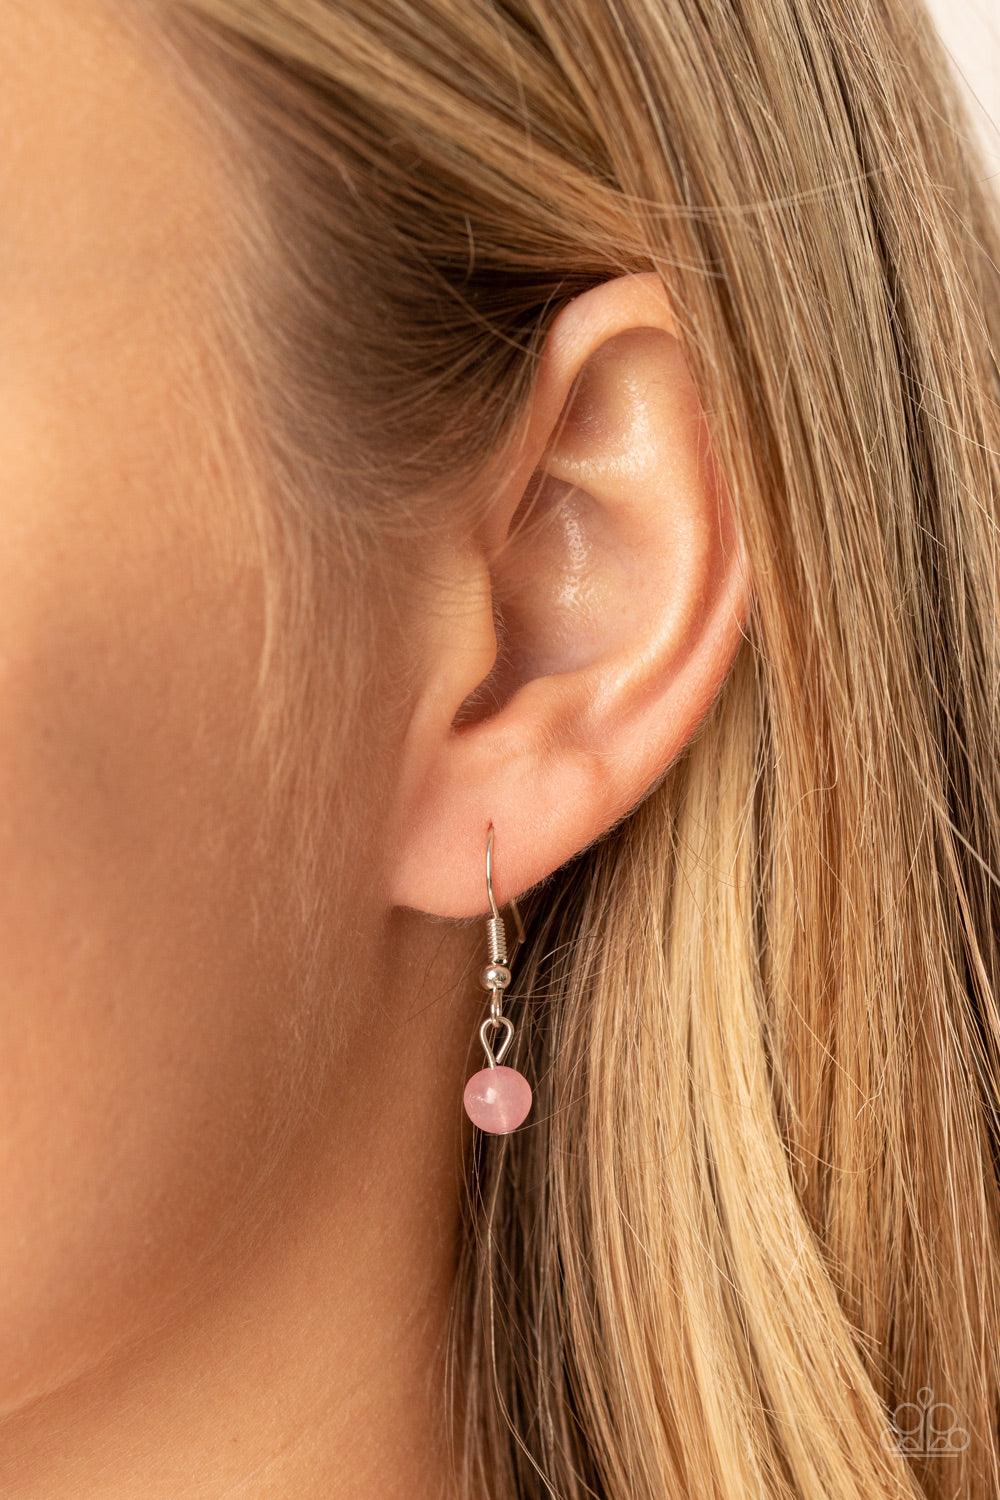 Paparazzi Accessories Magnificent Manifestation - Pink Bordered in a ring of flat silver studs, a mystical pink bead adorns the top of a textured silver half moon pendant that glides along a rounded silver snake chain for an ethereal fashion. Features an